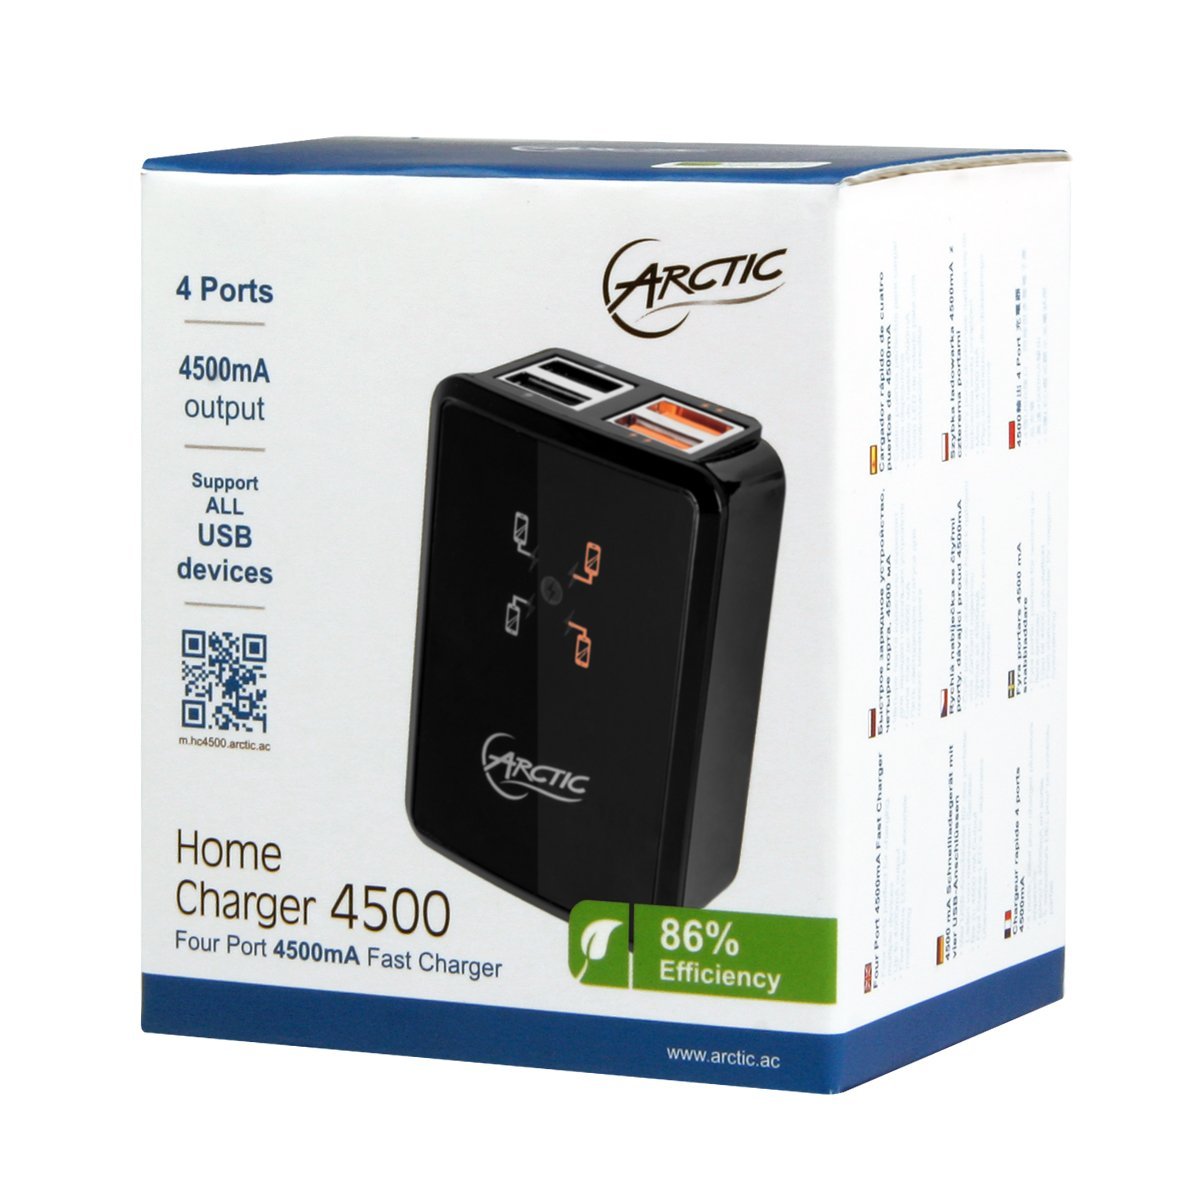 Home Charger 4500 3